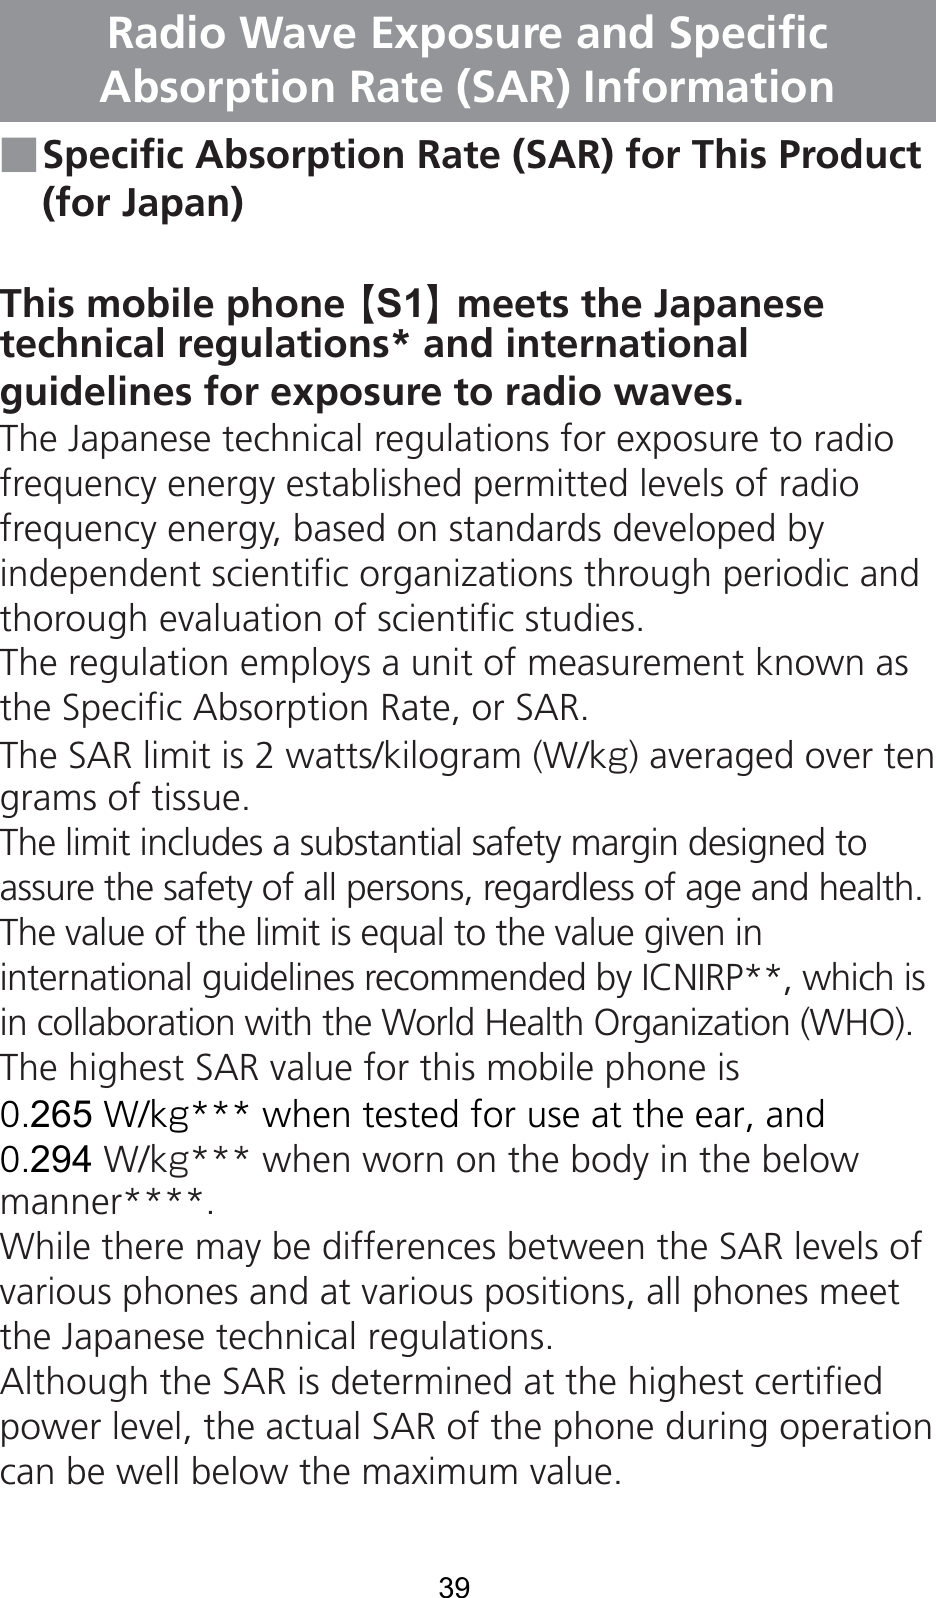 39Radio Wave Exposure and Specific Absorption Rate (SAR) Information■ Specific Absorption Rate (SAR) for This Product(for Japan)This mobile phone 【S1】 meets the Japanesetechnical regulations* and international guidelines for exposure to radio waves.The Japanese technical regulations for exposure to radio frequency energy established permitted levels of radio frequency energy, based on standards developed by independent scientific organizations through periodic and thorough evaluation of scientific studies.The regulation employs a unit of measurement known as the Specific Absorption Rate, or SAR.The SAR limit is 2 watts/kilogram (W/kg) averaged over ten grams of tissue.The limit includes a substantial safety margin designed to assure the safety of all persons, regardless of age and health. The value of the limit is equal to the value given in international guidelines recommended by ICNIRP**, which is in collaboration with the World Health Organization (WHO). The highest SAR value for this mobile phone is 0.265W/kg*** when tested for use at the ear, and 0.294W/kg*** when worn on the body in the below manner****.While there may be differences between the SAR levels of various phones and at various positions, all phones meet the Japanese technical regulations.Although the SAR is determined at the highest certified power level, the actual SAR of the phone during operation can be well below the maximum value.